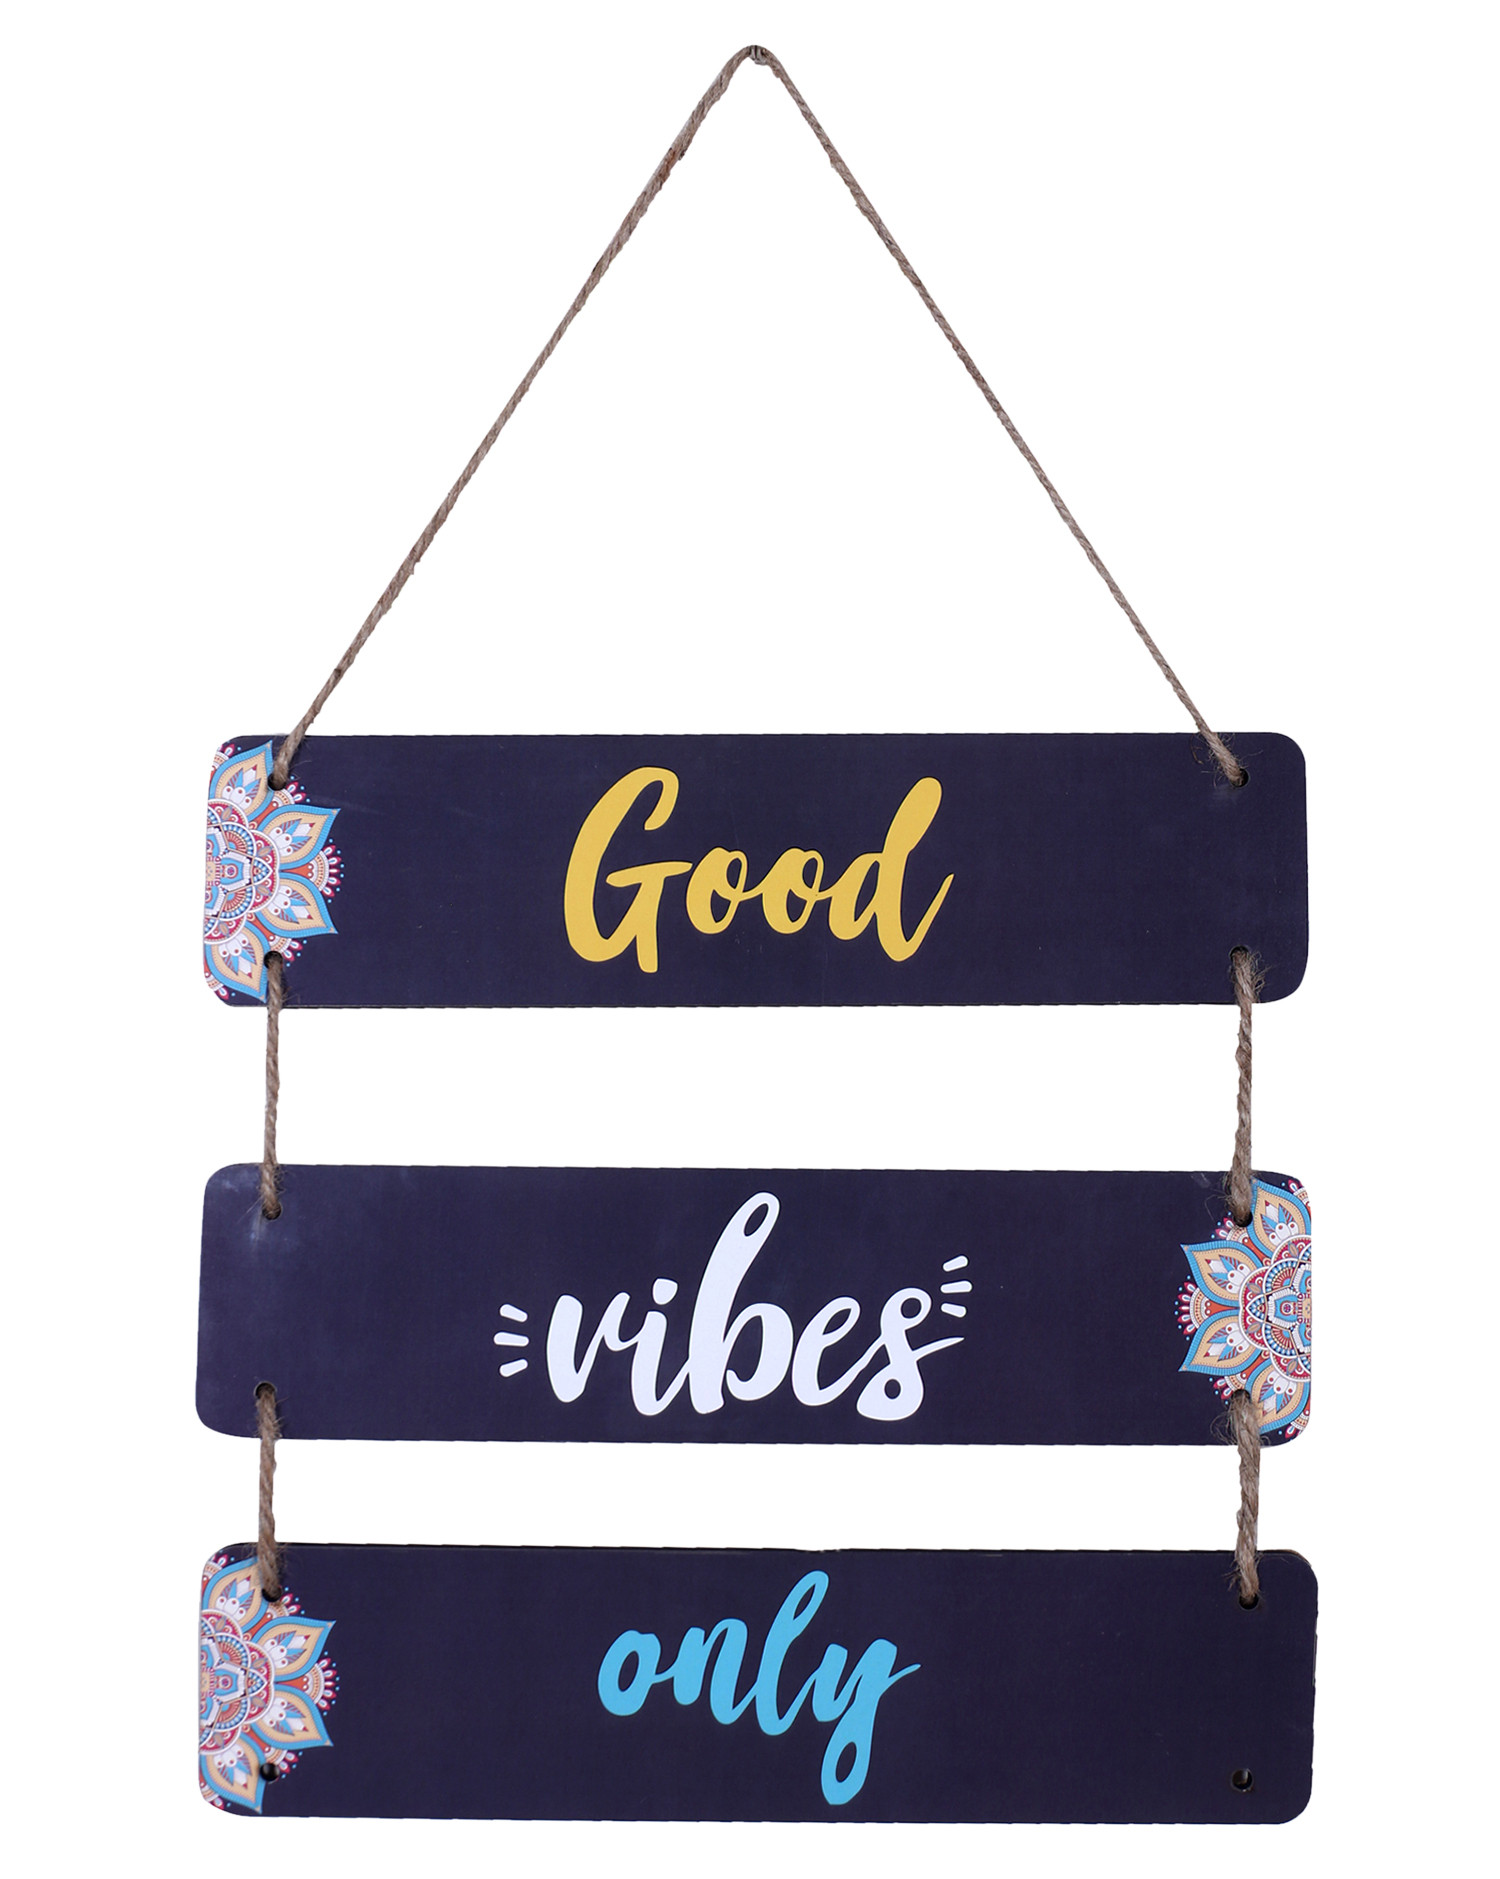 Kuber Industries Wooden 3 Layered Meaningfull Wall Hanging Quotes For Home & Office Decoration (Black)